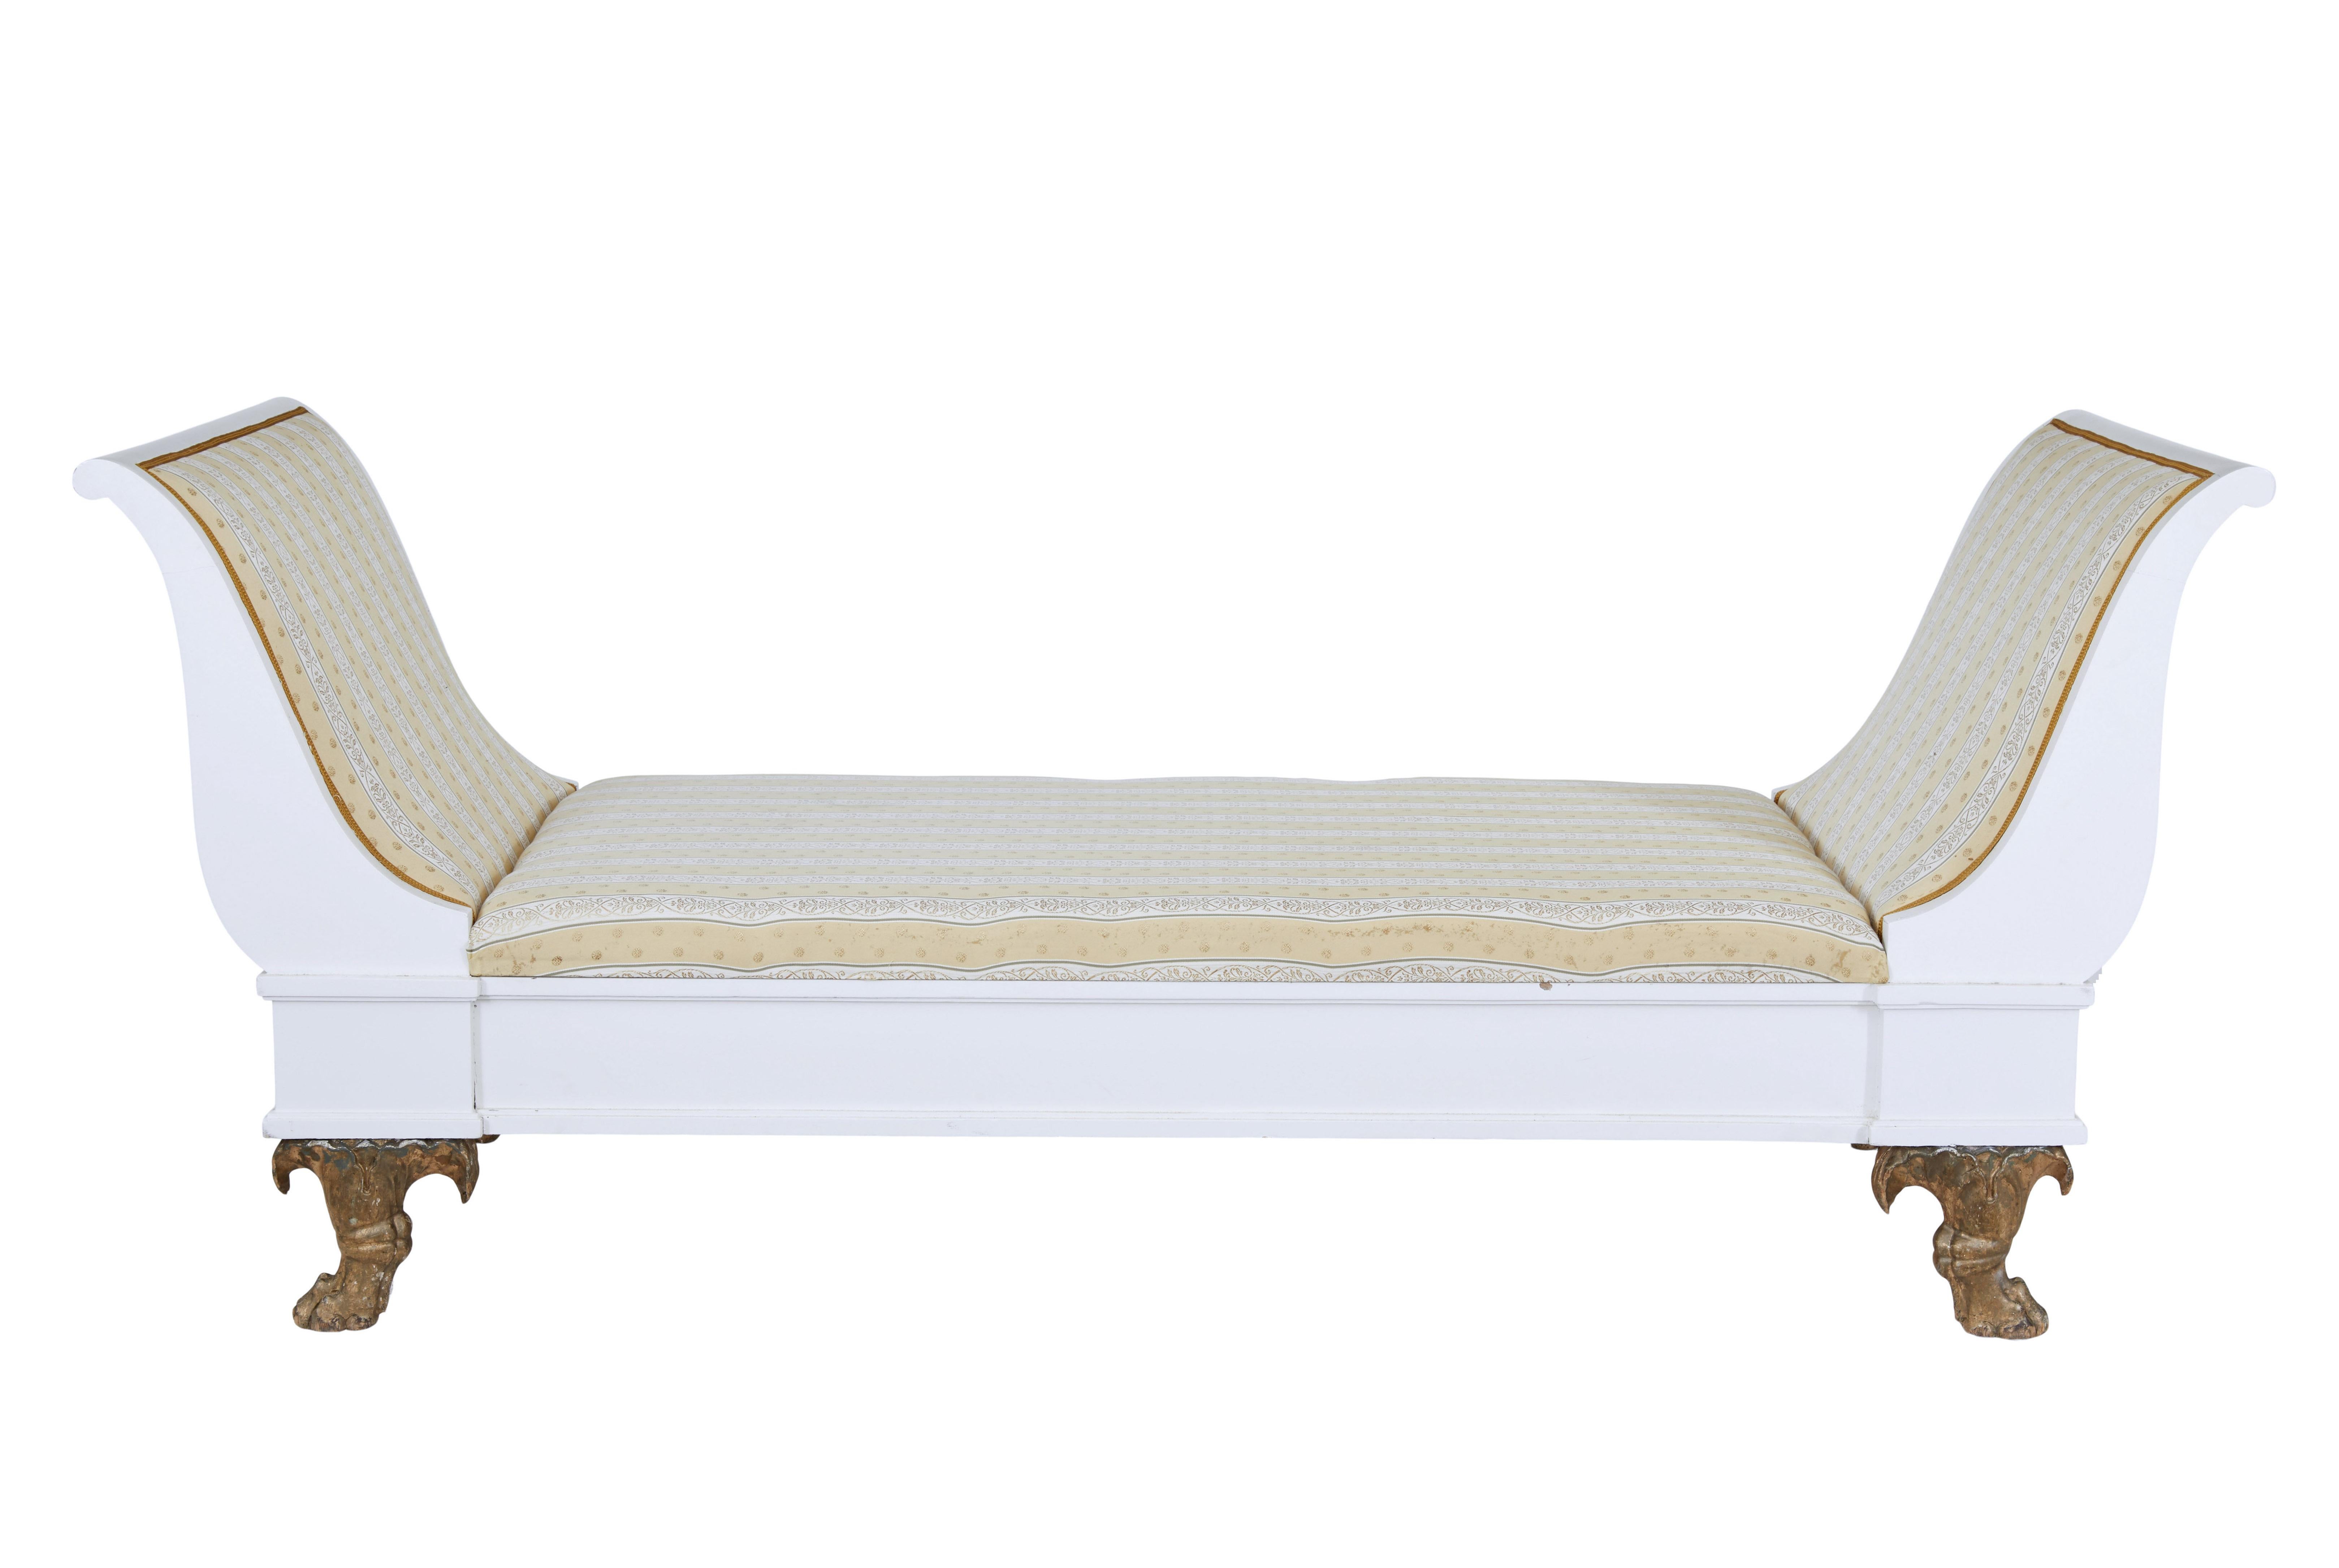 Early 20th century empire revival painted Scandinavian day bed circa 1900.

Grand sized Swedish day bed featuring scrolled end supports.  Pine frame has been later painted white, standing on carved paw feet with original gilt and traces of original